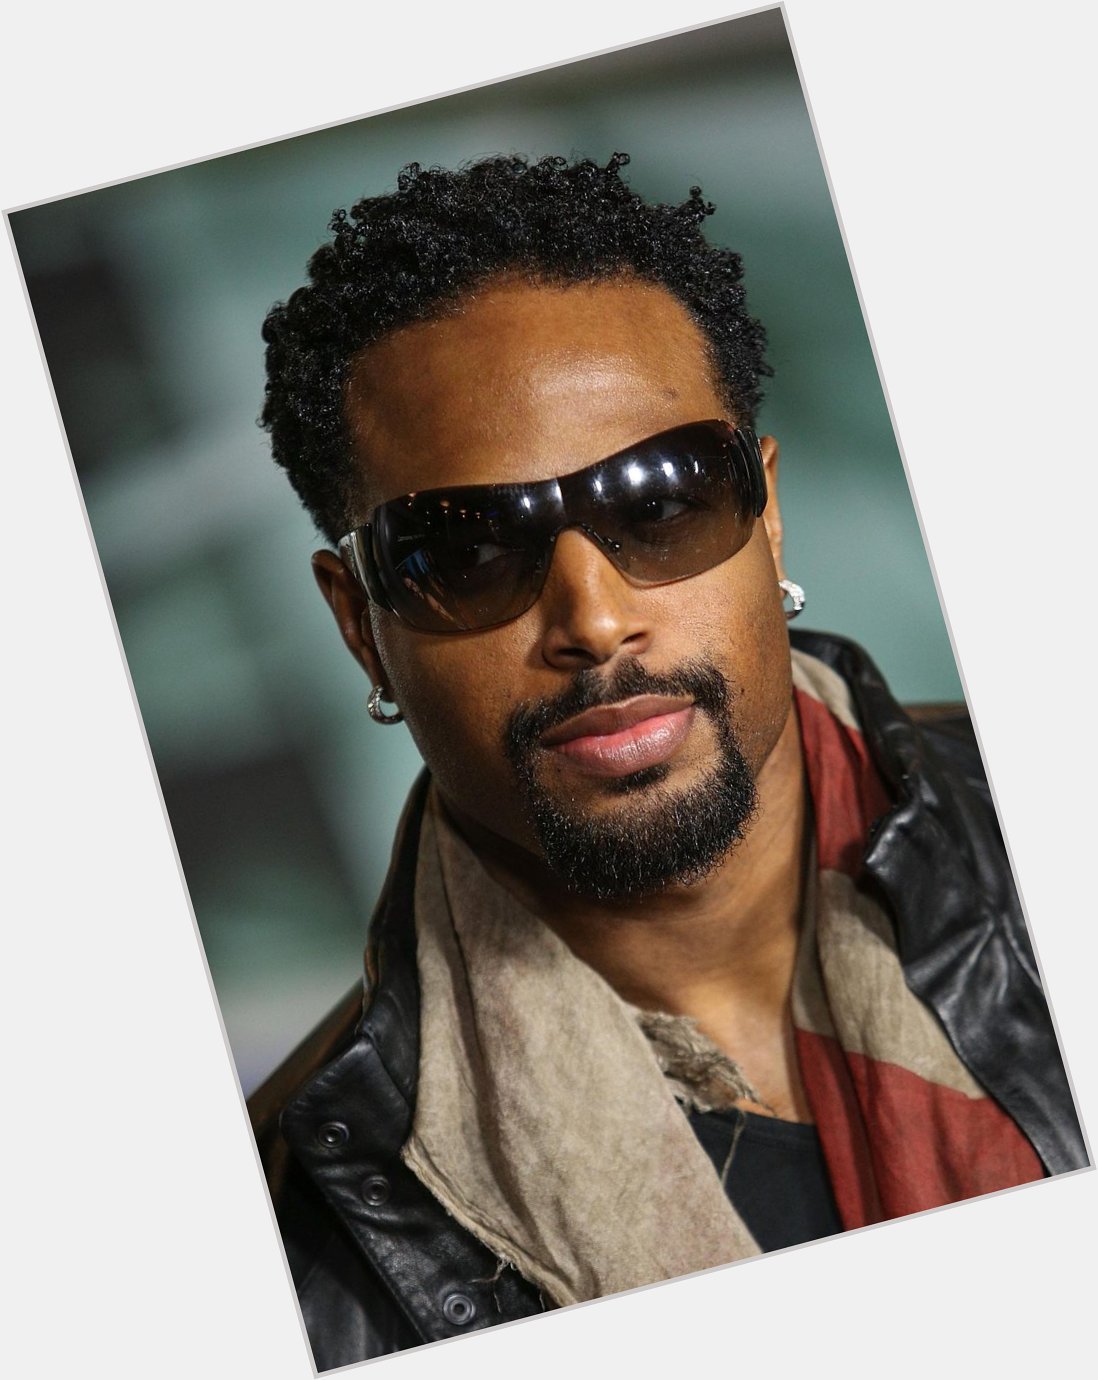 Happy Birthday to Shawn Wayans, who turns 44 today! 